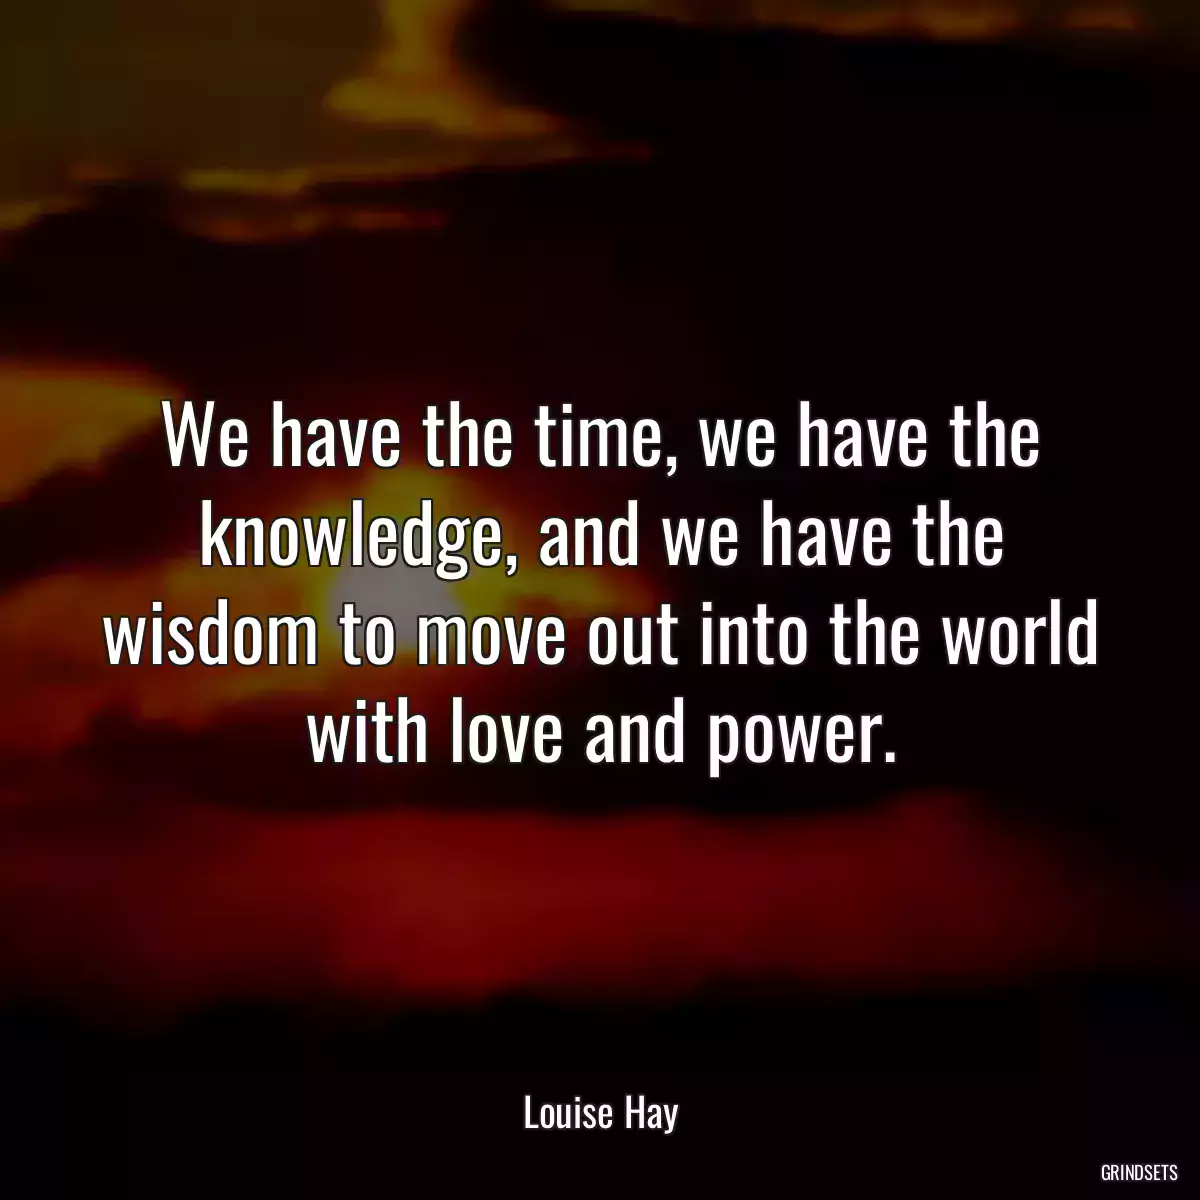 We have the time, we have the knowledge, and we have the wisdom to move out into the world with love and power.